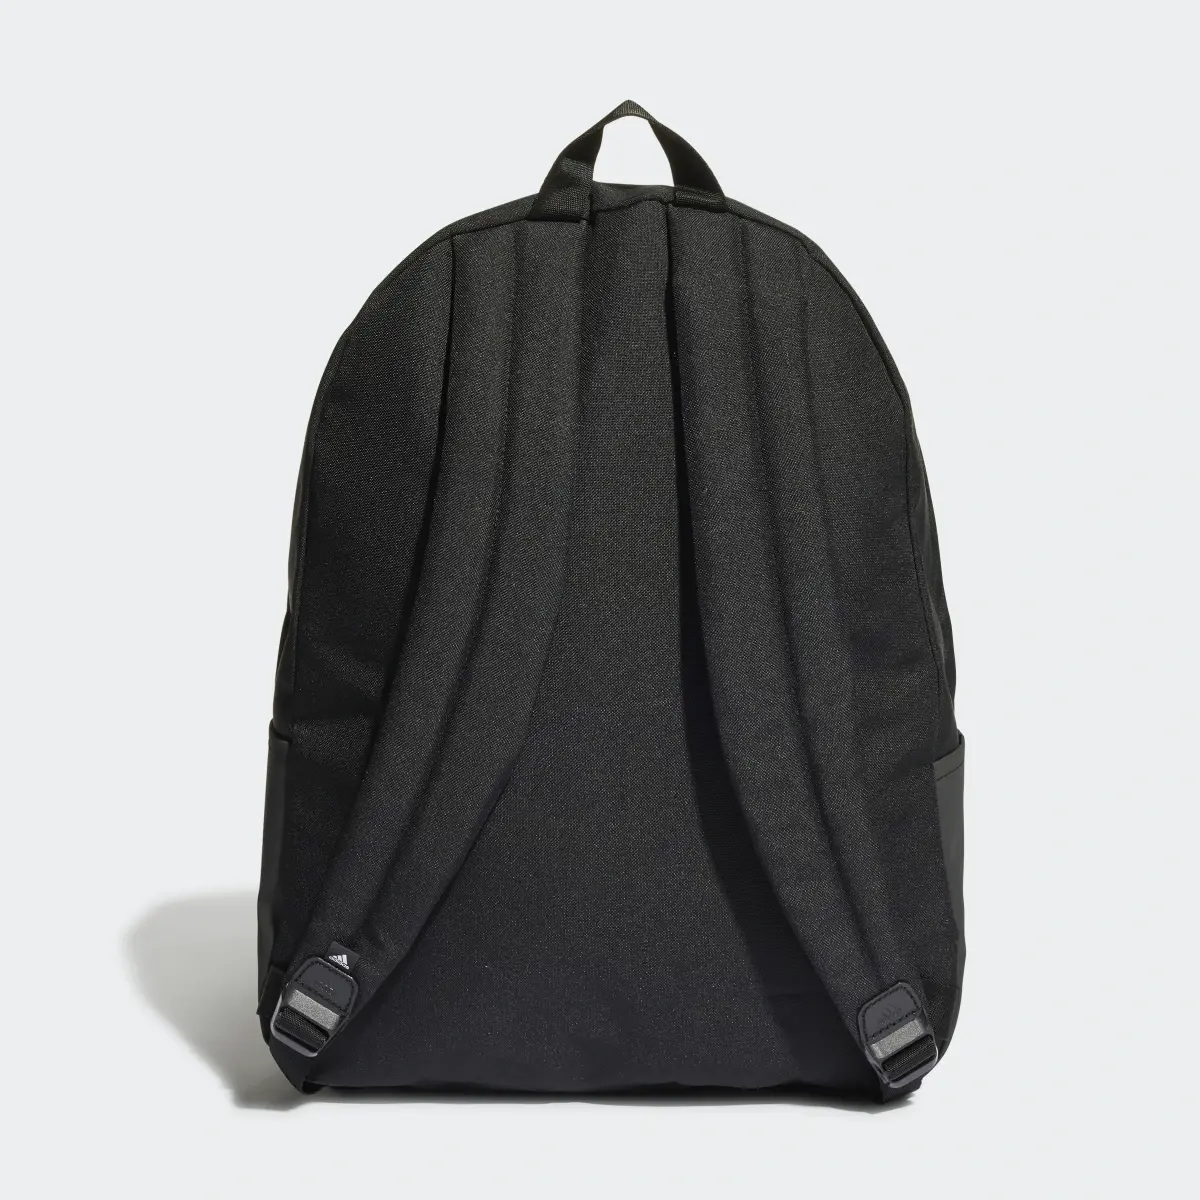 Adidas Classic Badge of Sport 3-Stripes Backpack. 3